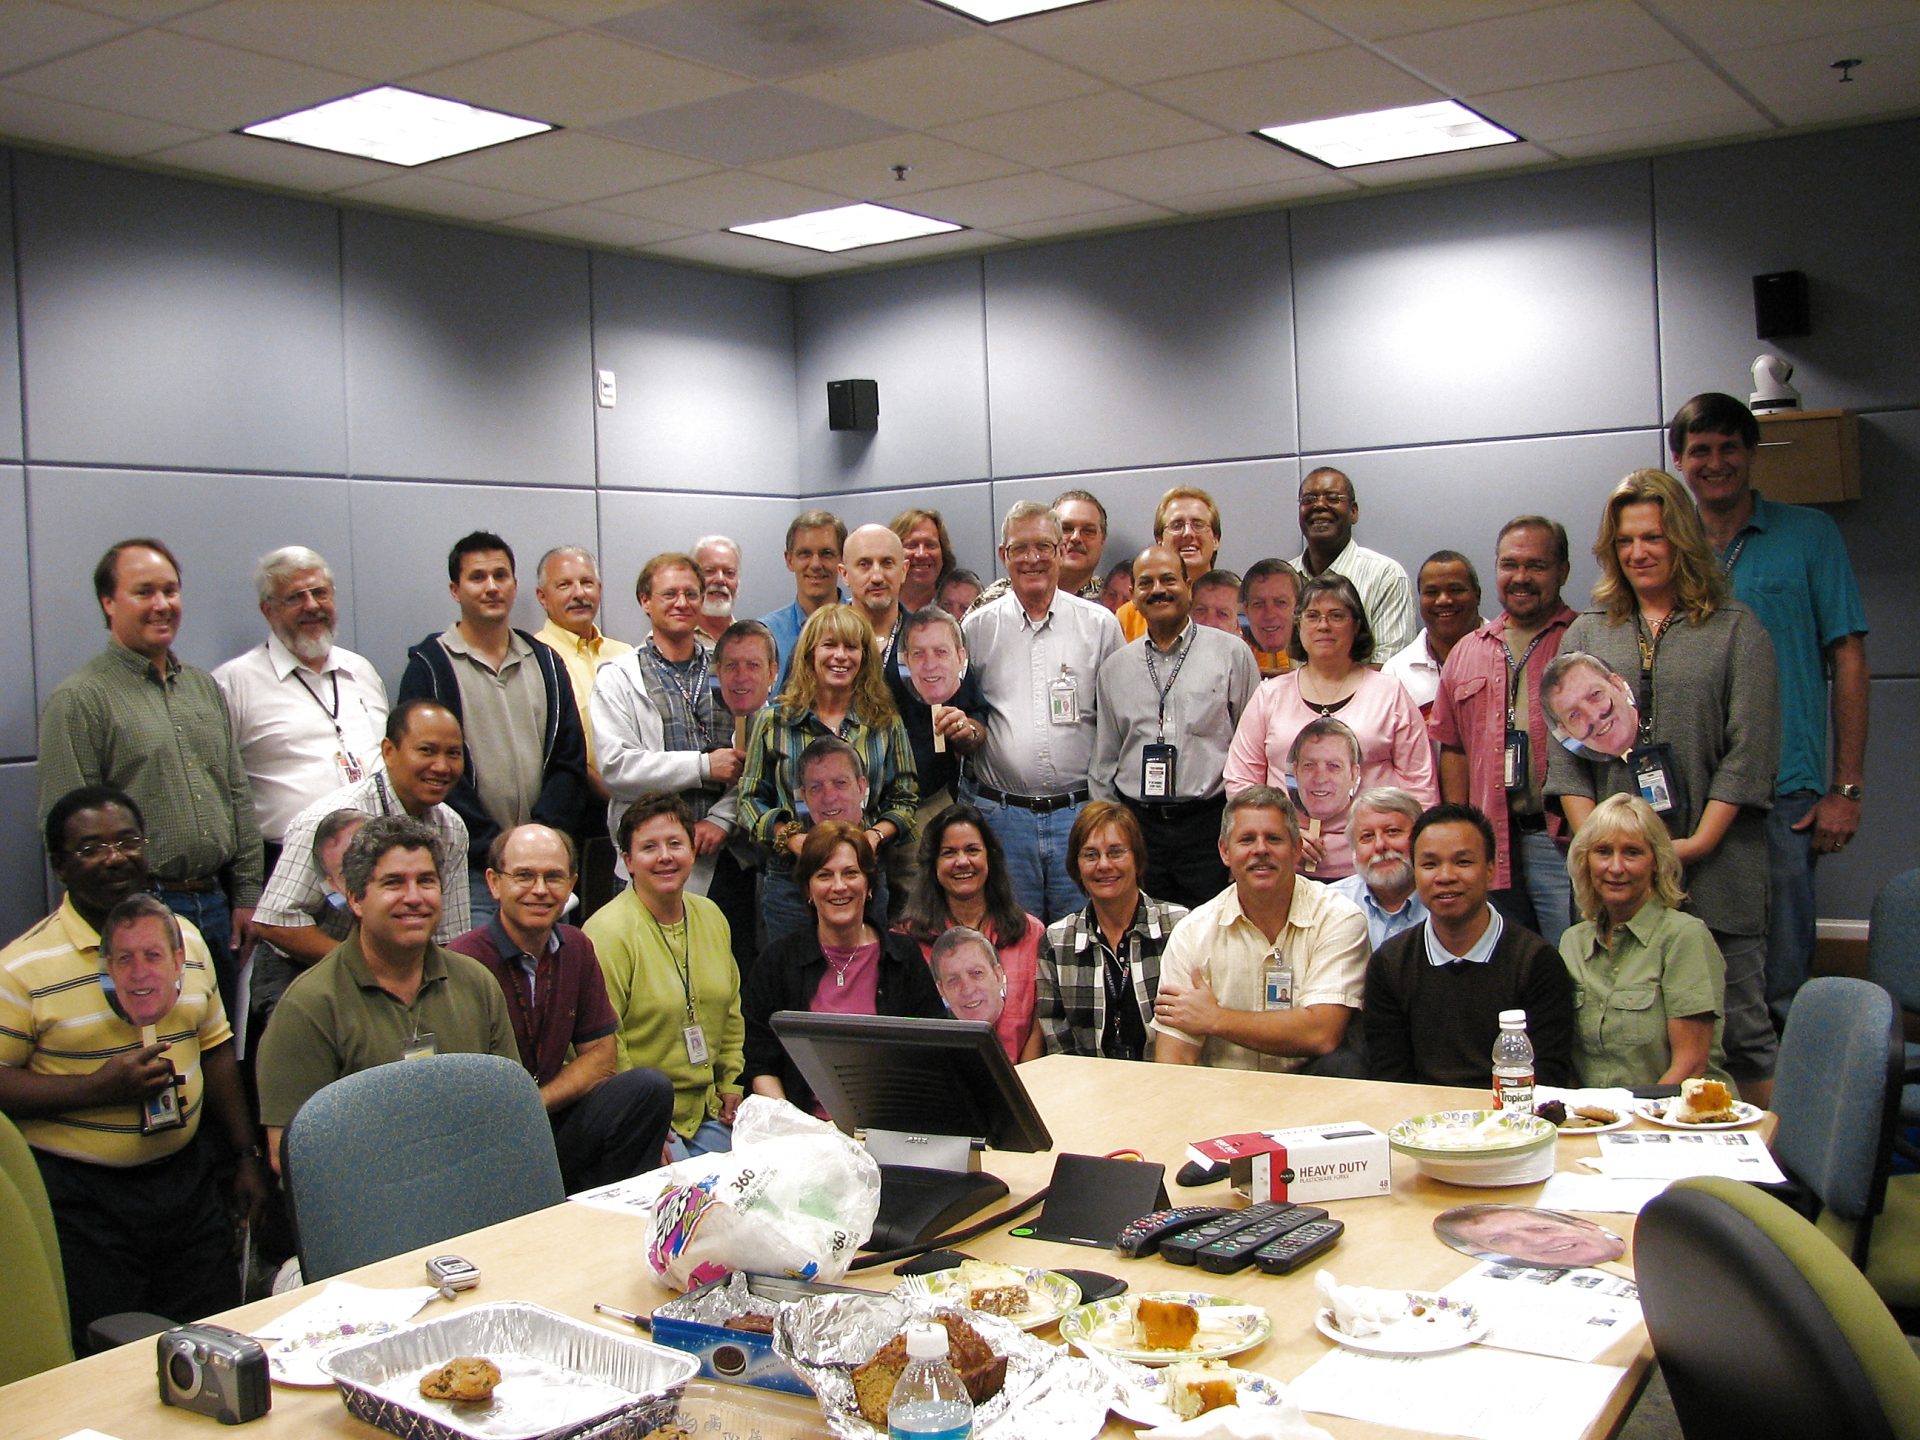 Chris with the United Space Alliance Design group in 2006.